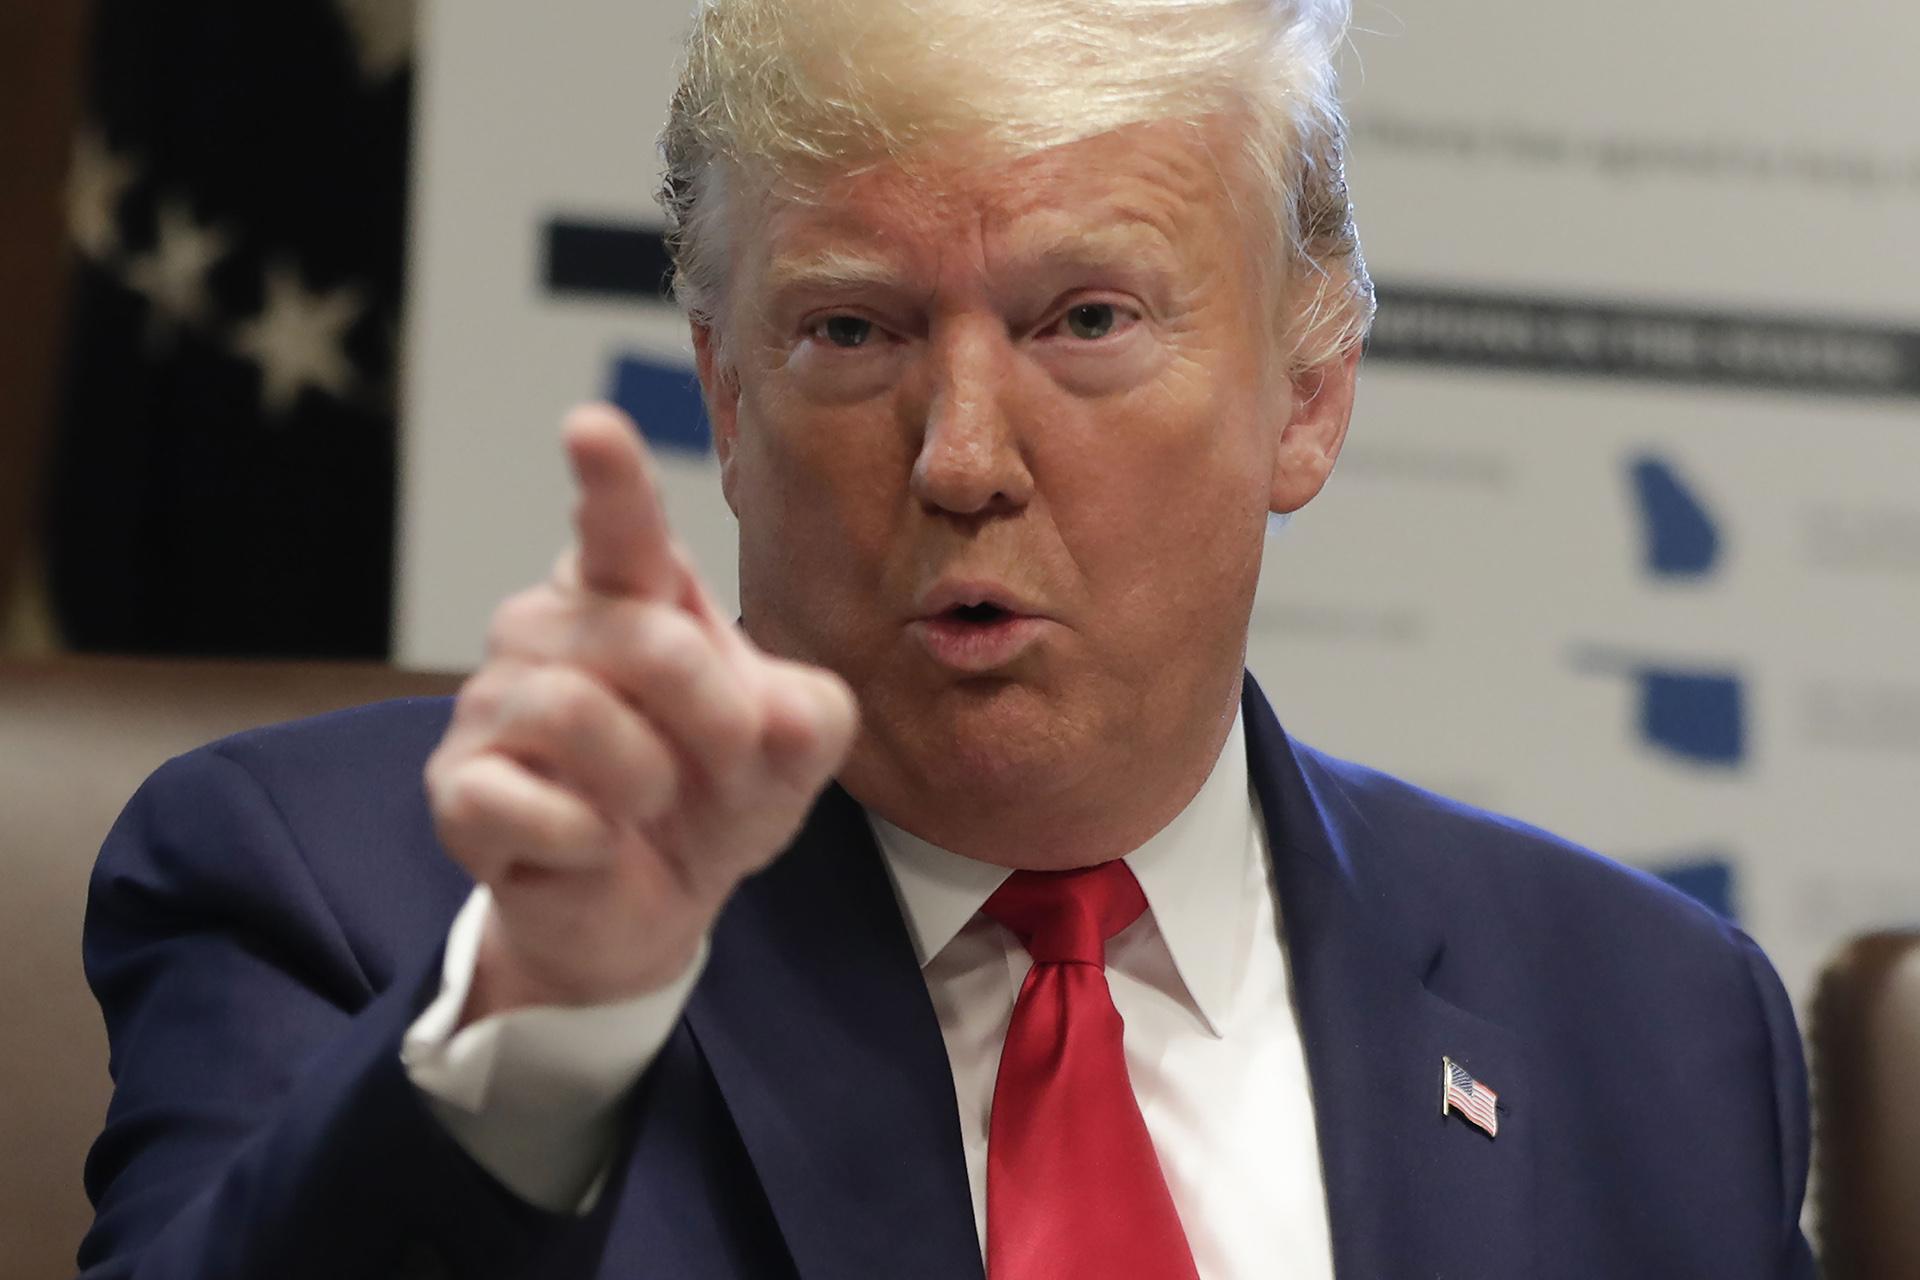 President Donald Trump gestures while speaking during a Cabinet meeting in the Cabinet Room of the White House, Monday, Oct. 21, 2019, in Washington. (AP Photo / Pablo Martinez Monsivais)